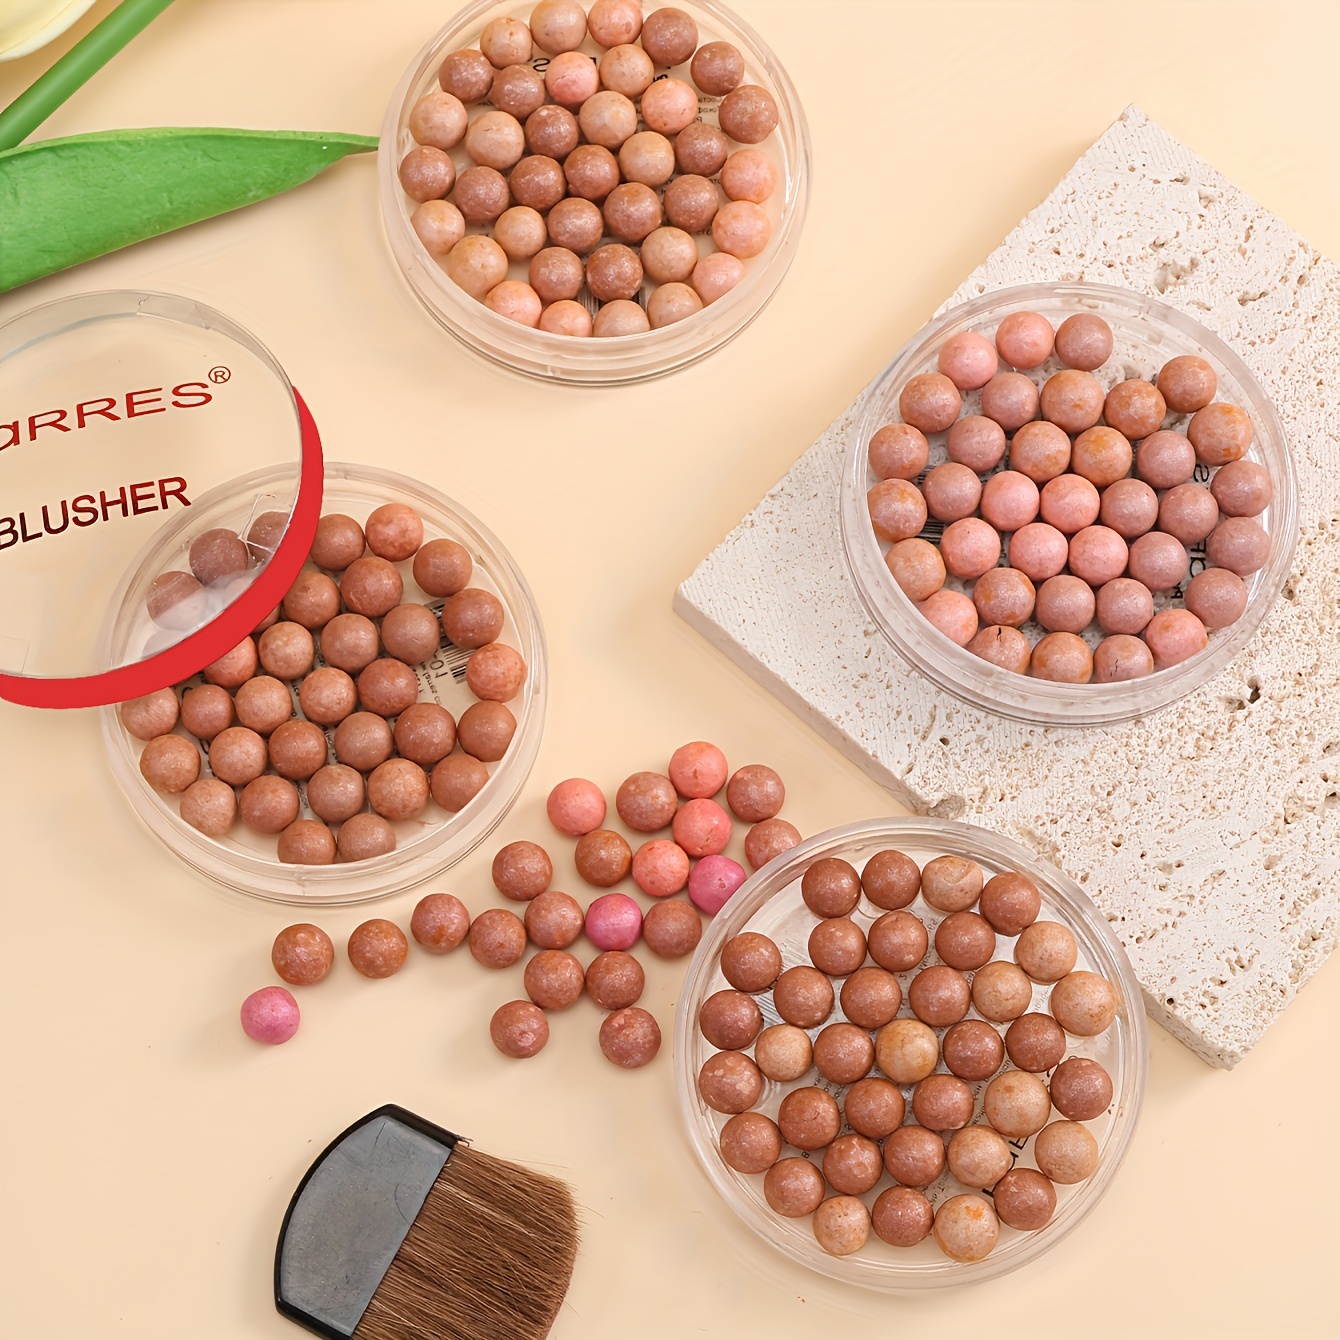 

Multi-tone Powder Blush Pearls With Brush - Water Resistant, Natural Finish Blush For All Skin Tones, Long-lasting Formula For Boosted Coverage - Pink & Skin Color Palette